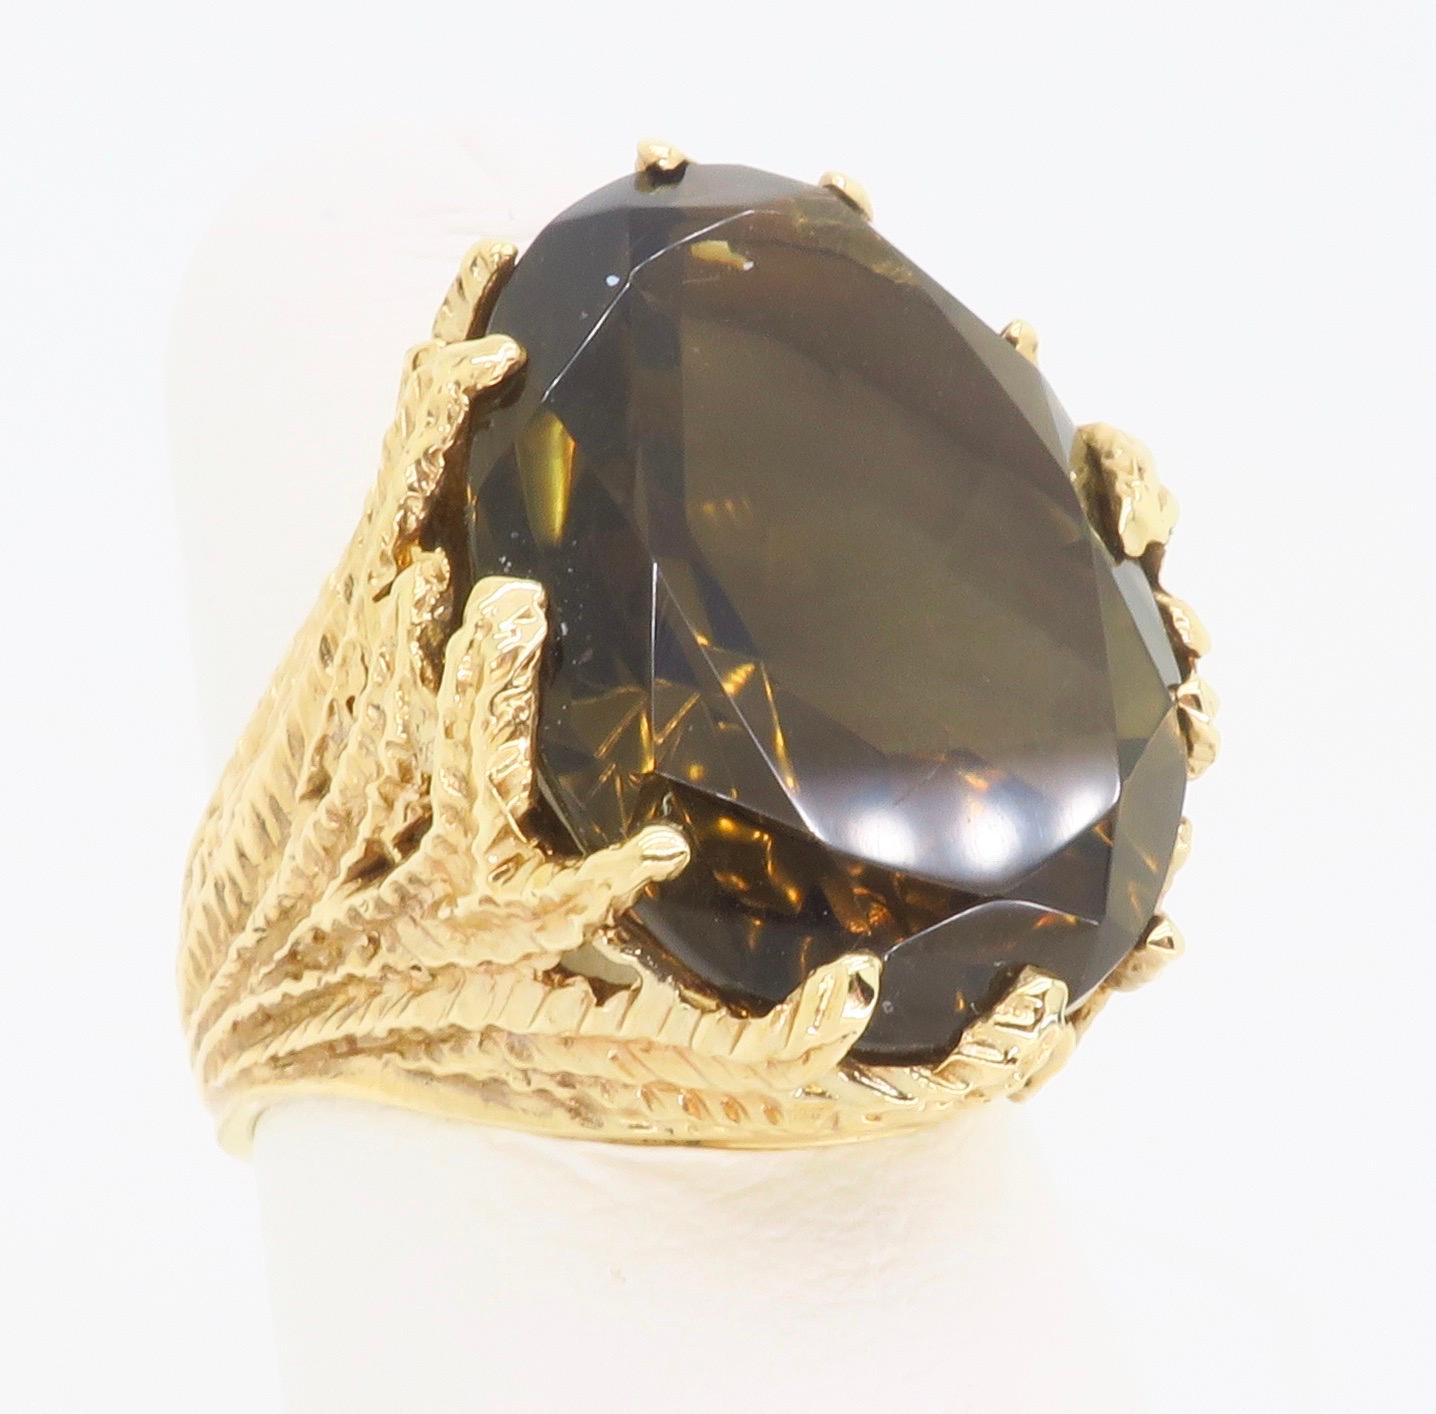 Large Smokey Quartz set into an intricate 14k yellow gold setting. 

Gemstone: Smokey Quartz
Gemstone Size: 19.8 x 15mm
Metal: Yellow Gold
Marked/Tested: 